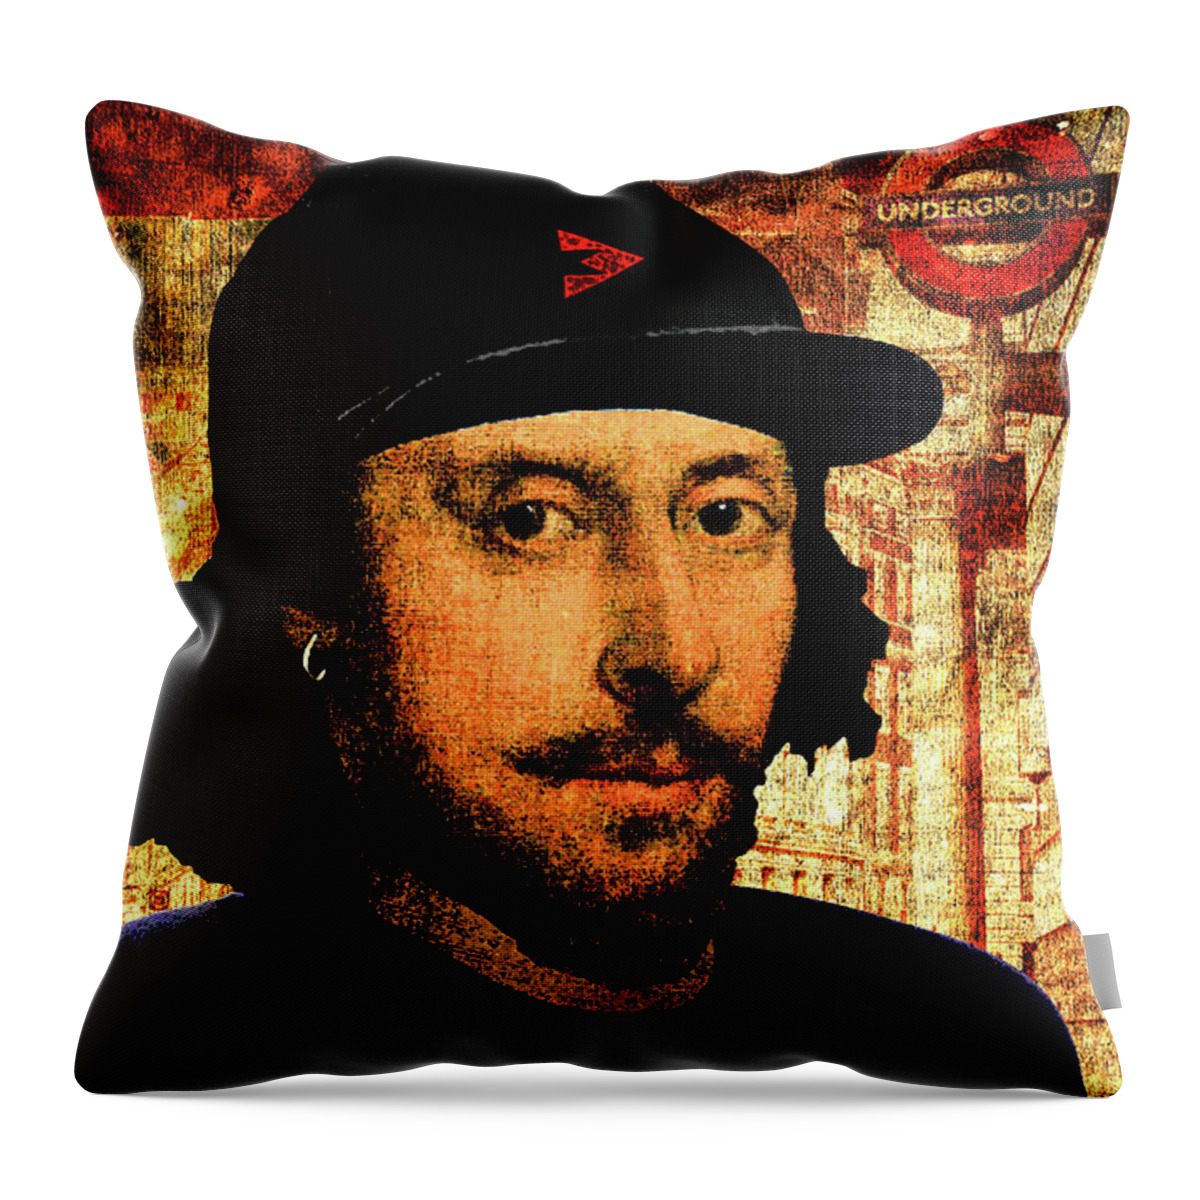 William Shakespeare Throw Pillow featuring the digital art William Shakespeare as a Dude by Zoran Maslic